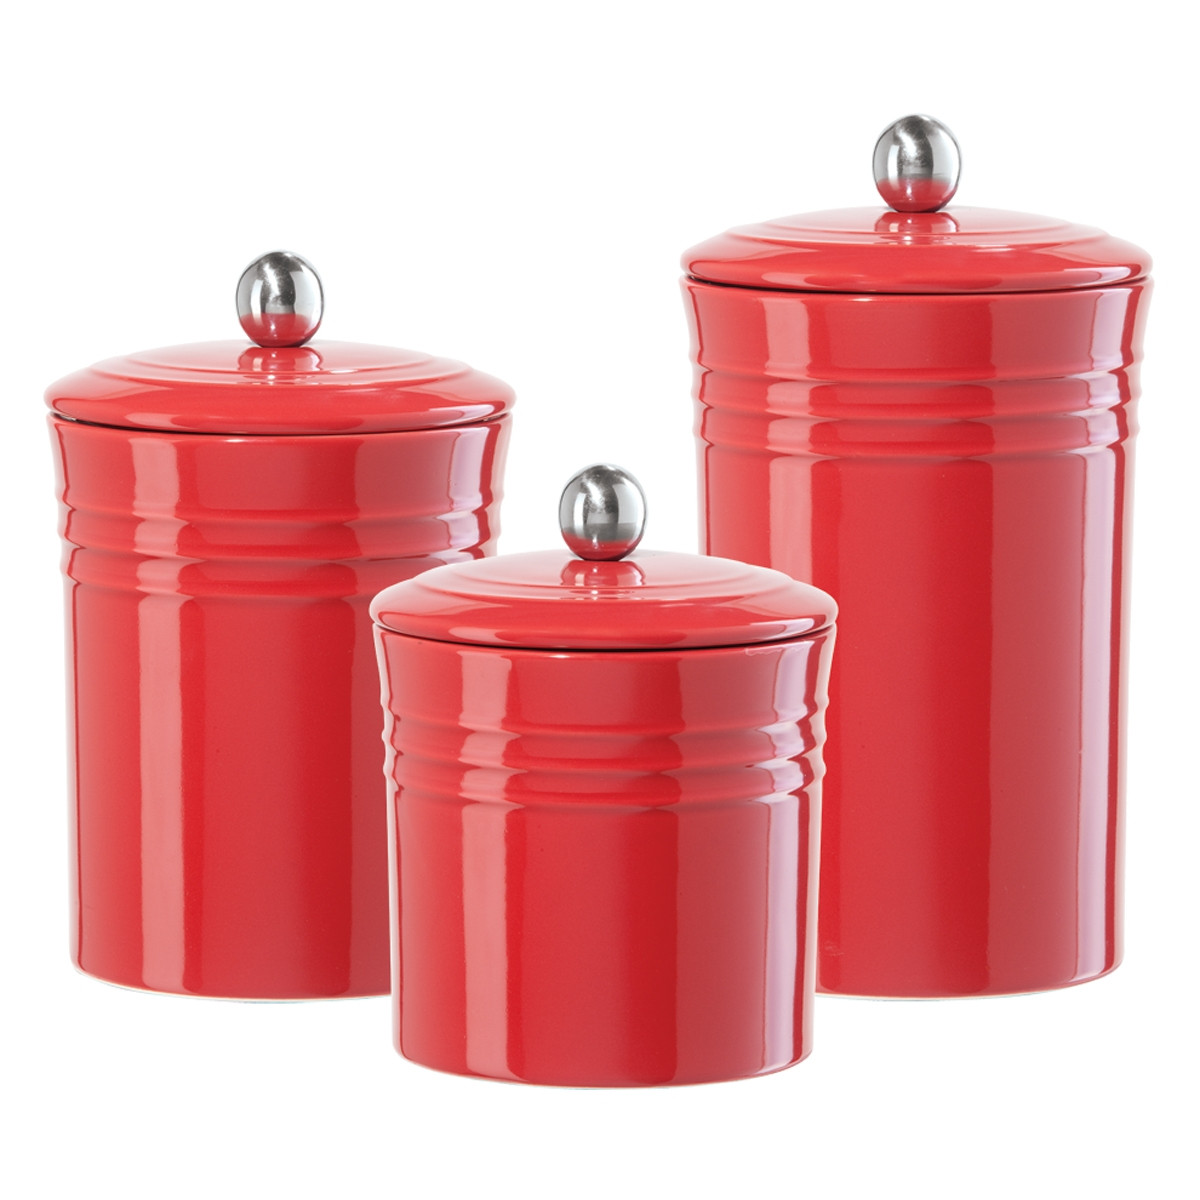 Kitchen Storage Canister
 Gift & Home Today Storage canisters for the kitchen